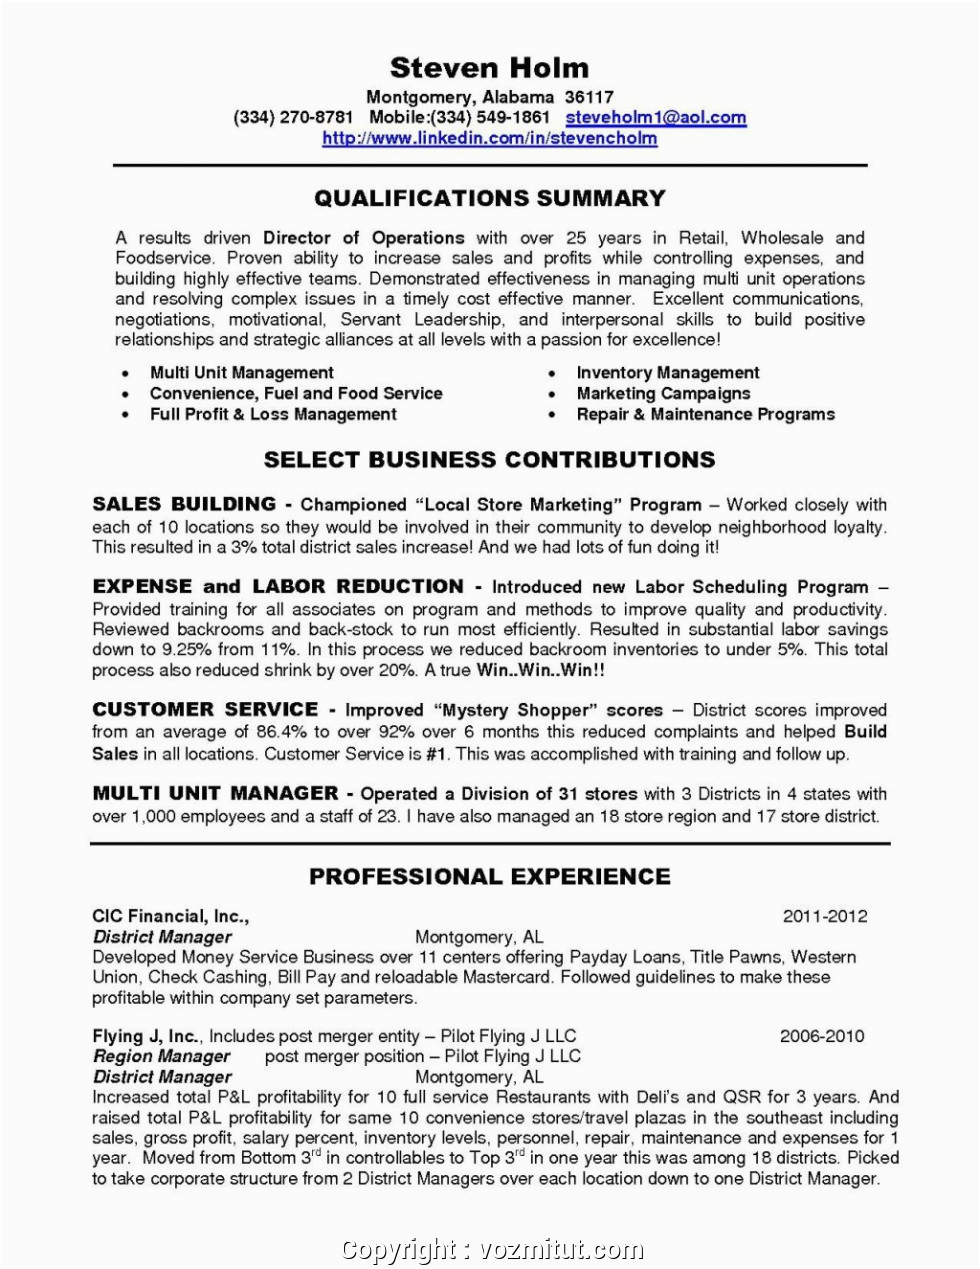 Sample Resume for Hospitality and tourism Management Create Resume Manager tourism Hospitality and tourism